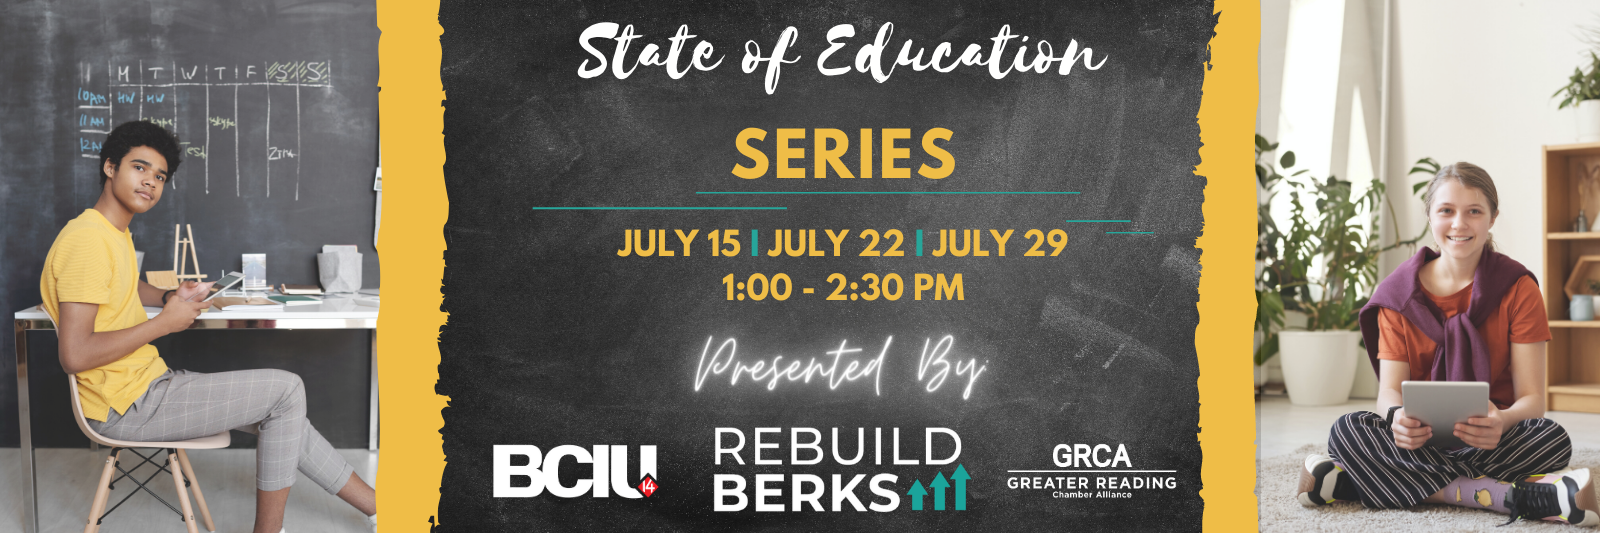 State of Education Series